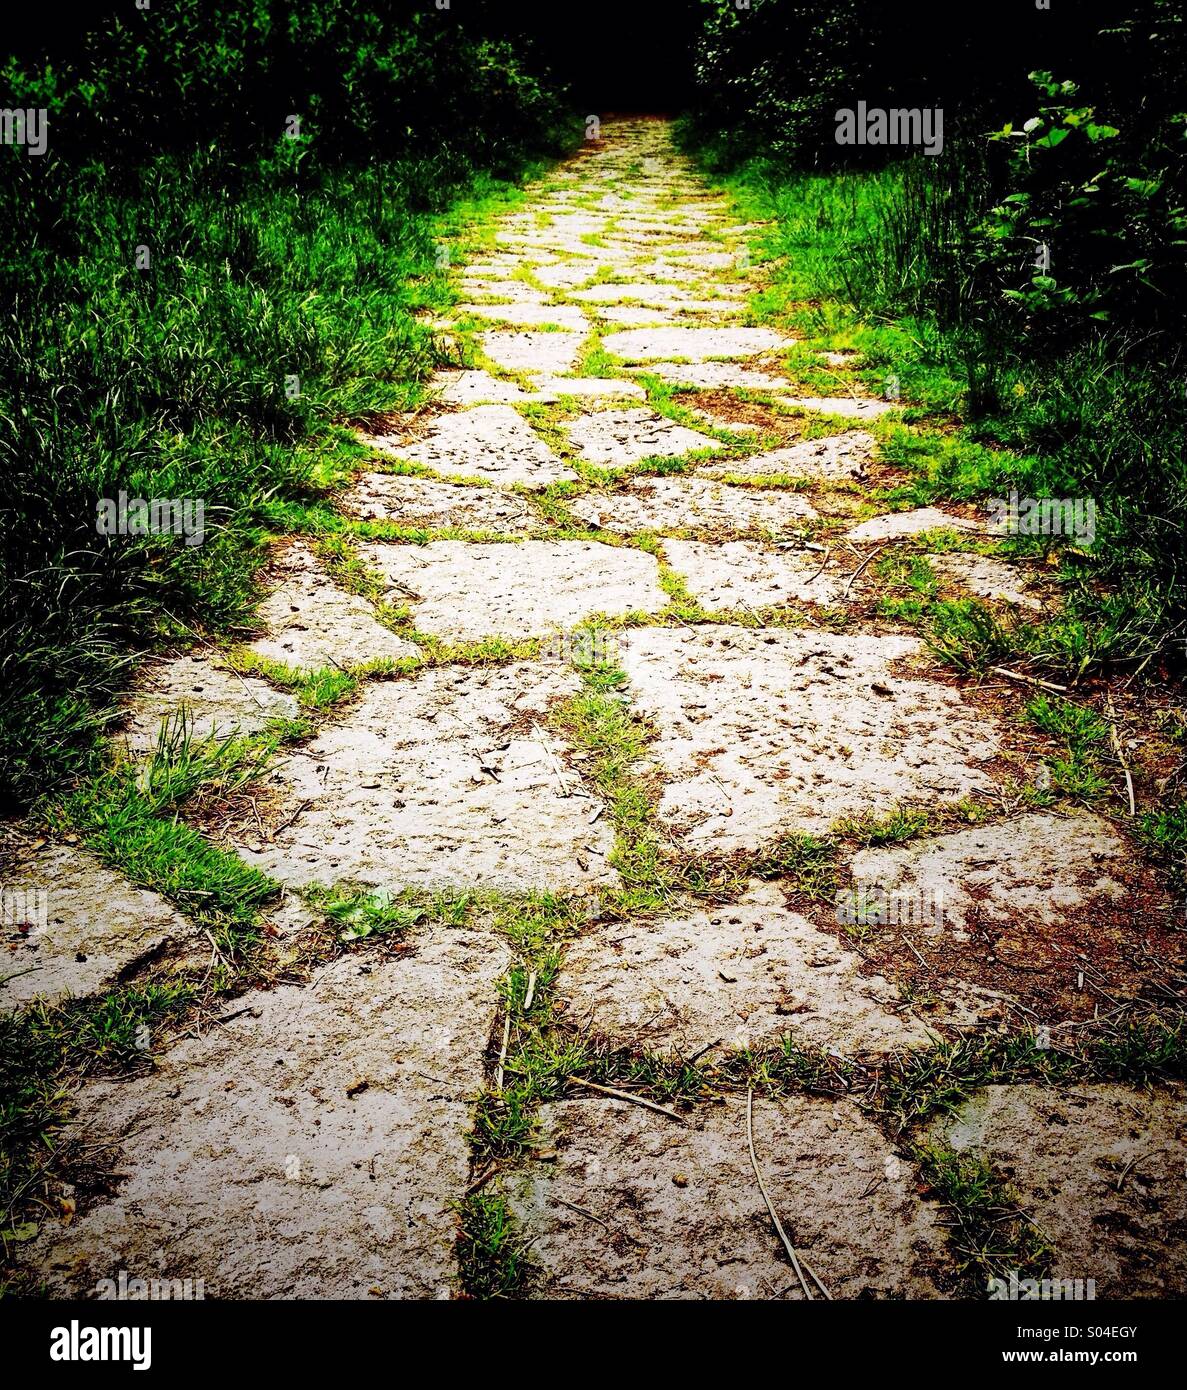 Stone path with grass growing between slabs Stock Photo